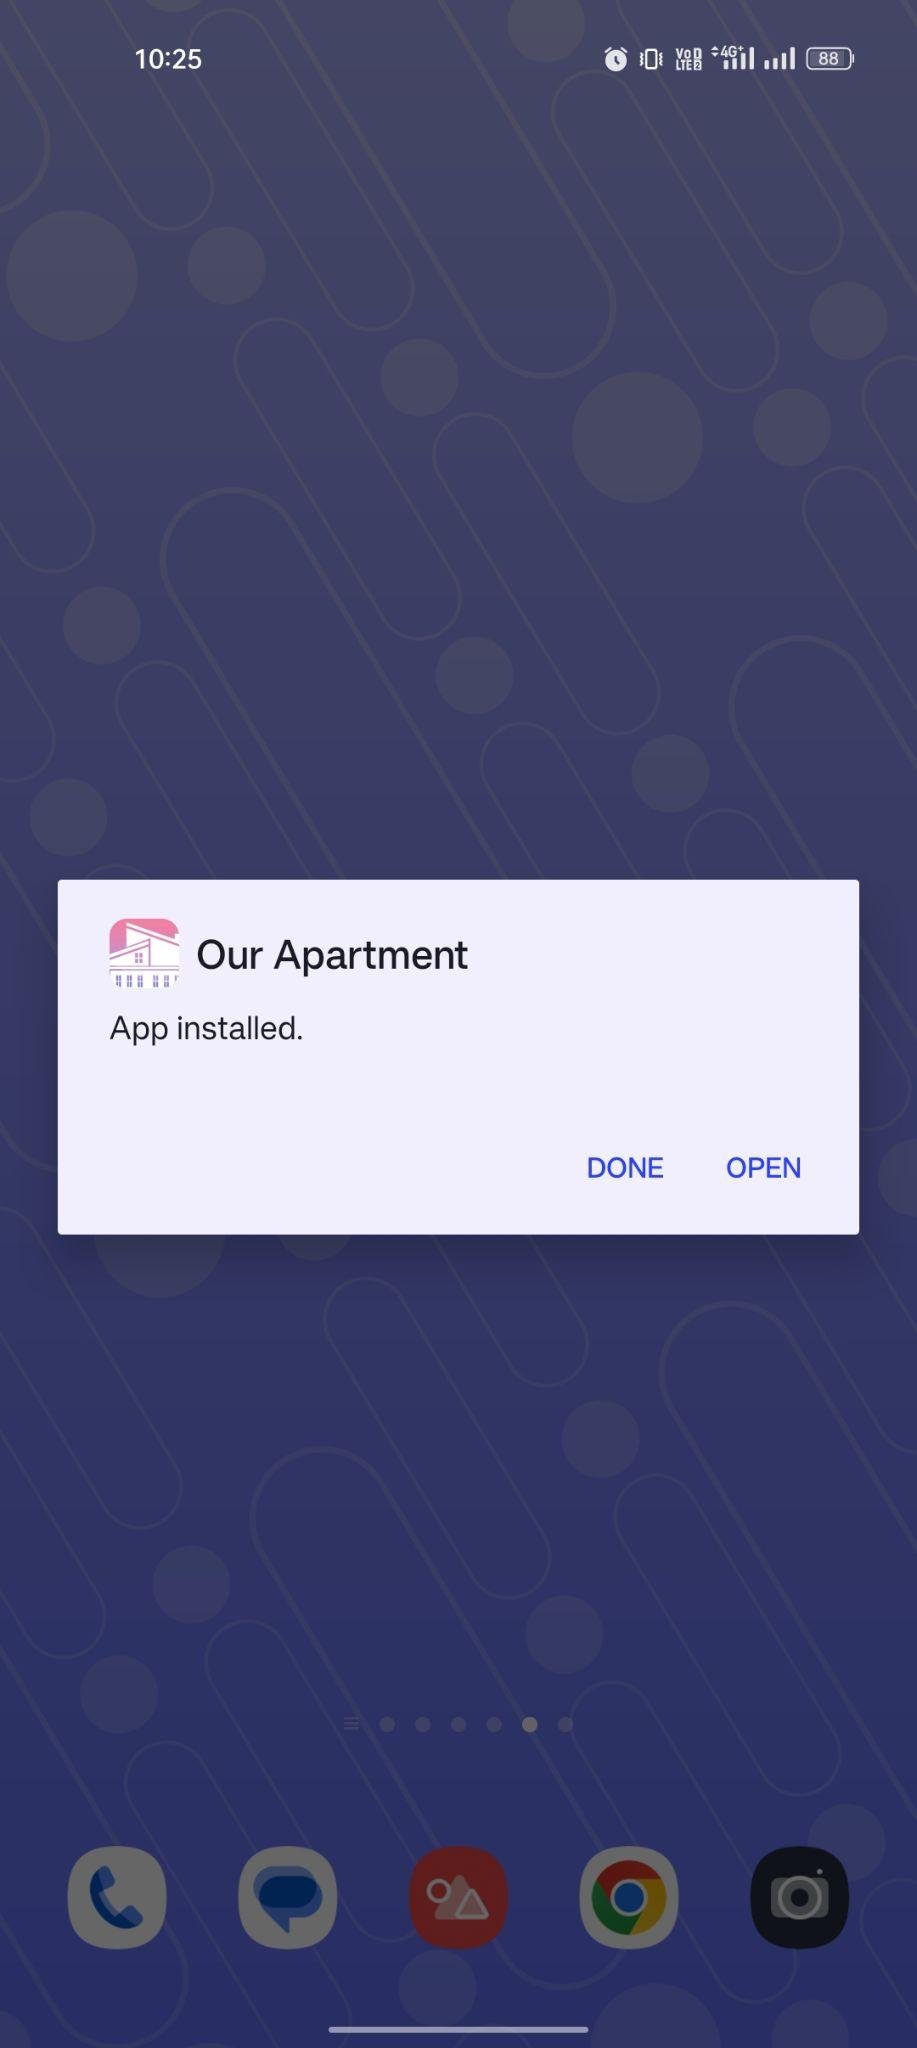 Our Apartment apk installed